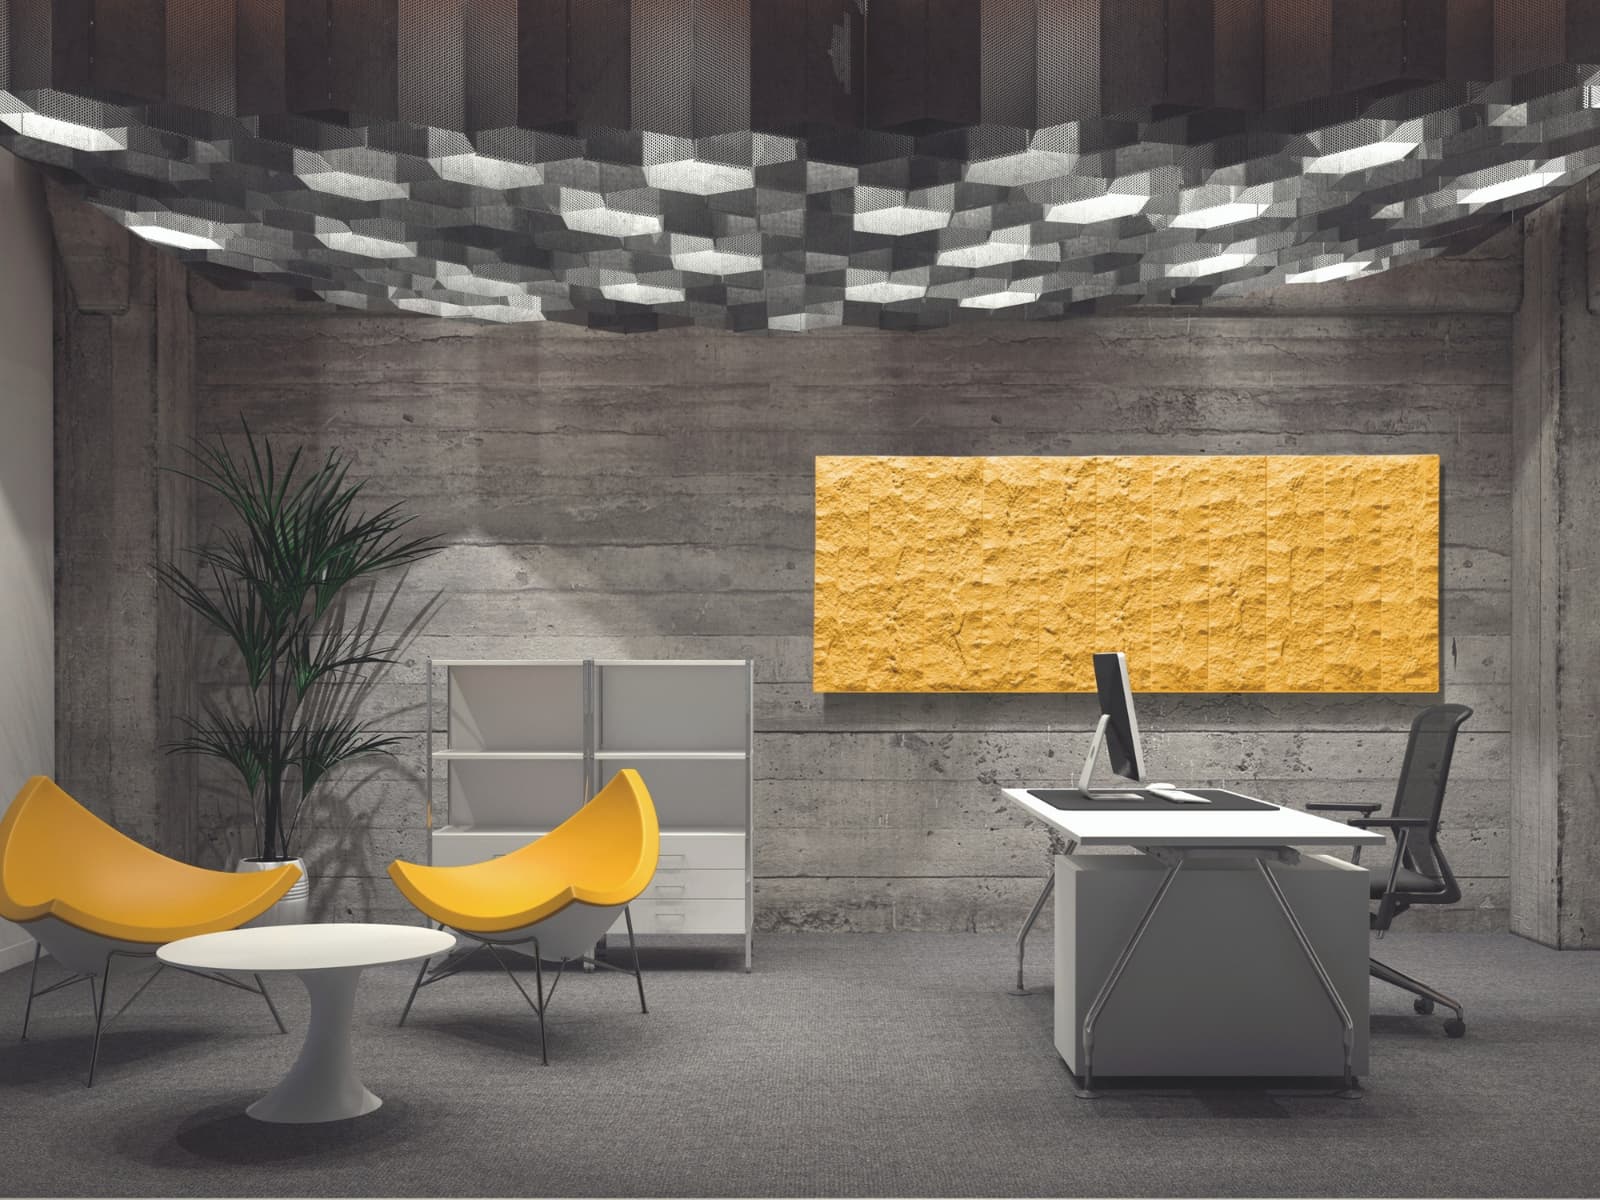 Pietra electric creative radiators make a functional feature in an office